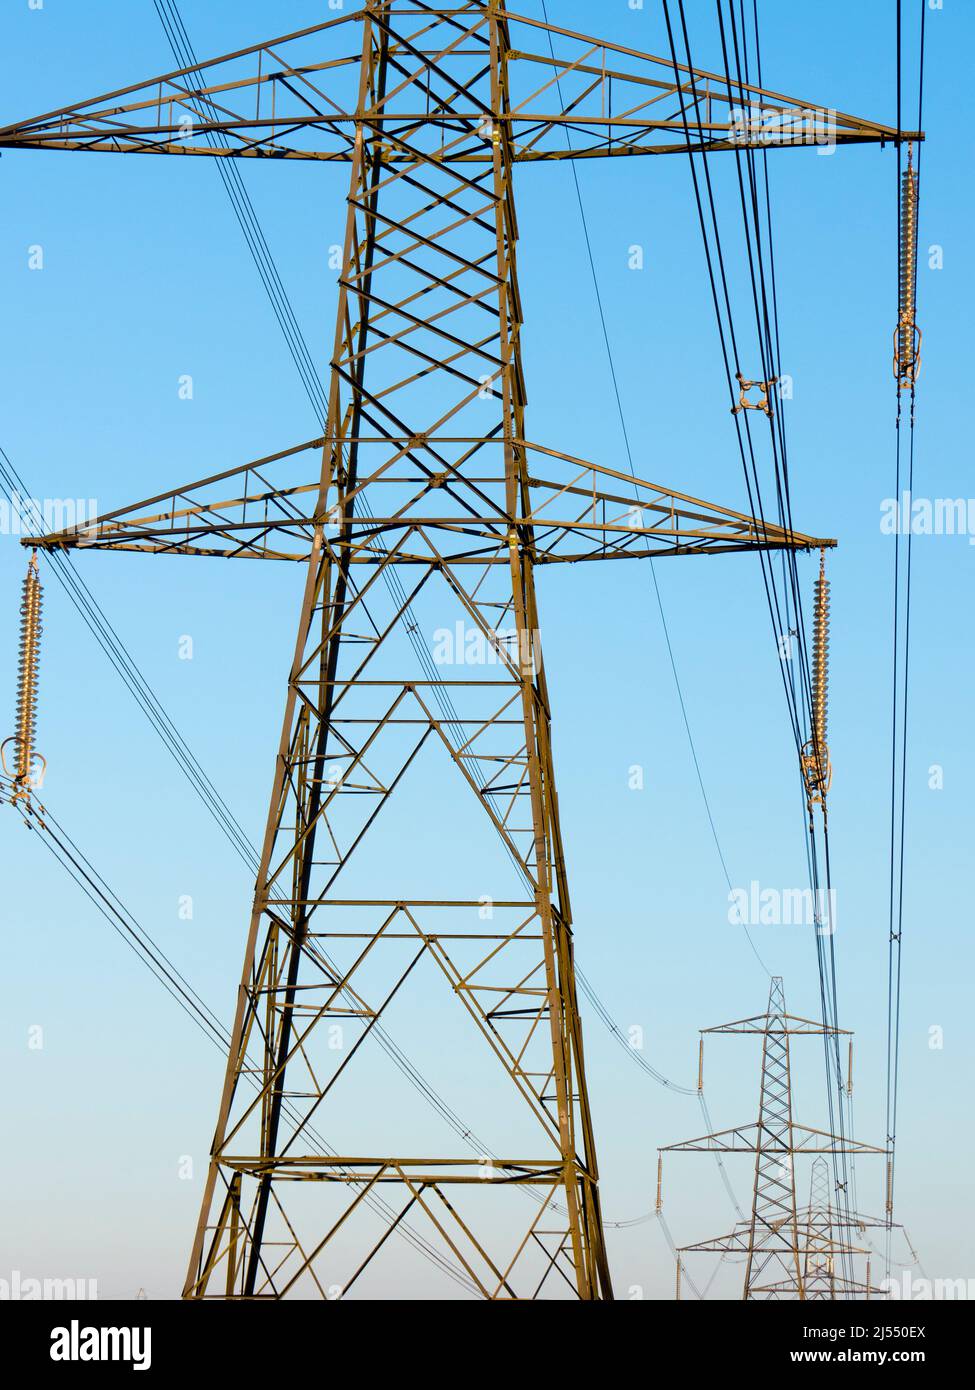 I love electricity pylons; I find their abstract, gaunt shapes endlessly fascinating. Here we see a group of giant specimens in Redbridge, south of Ox Stock Photo